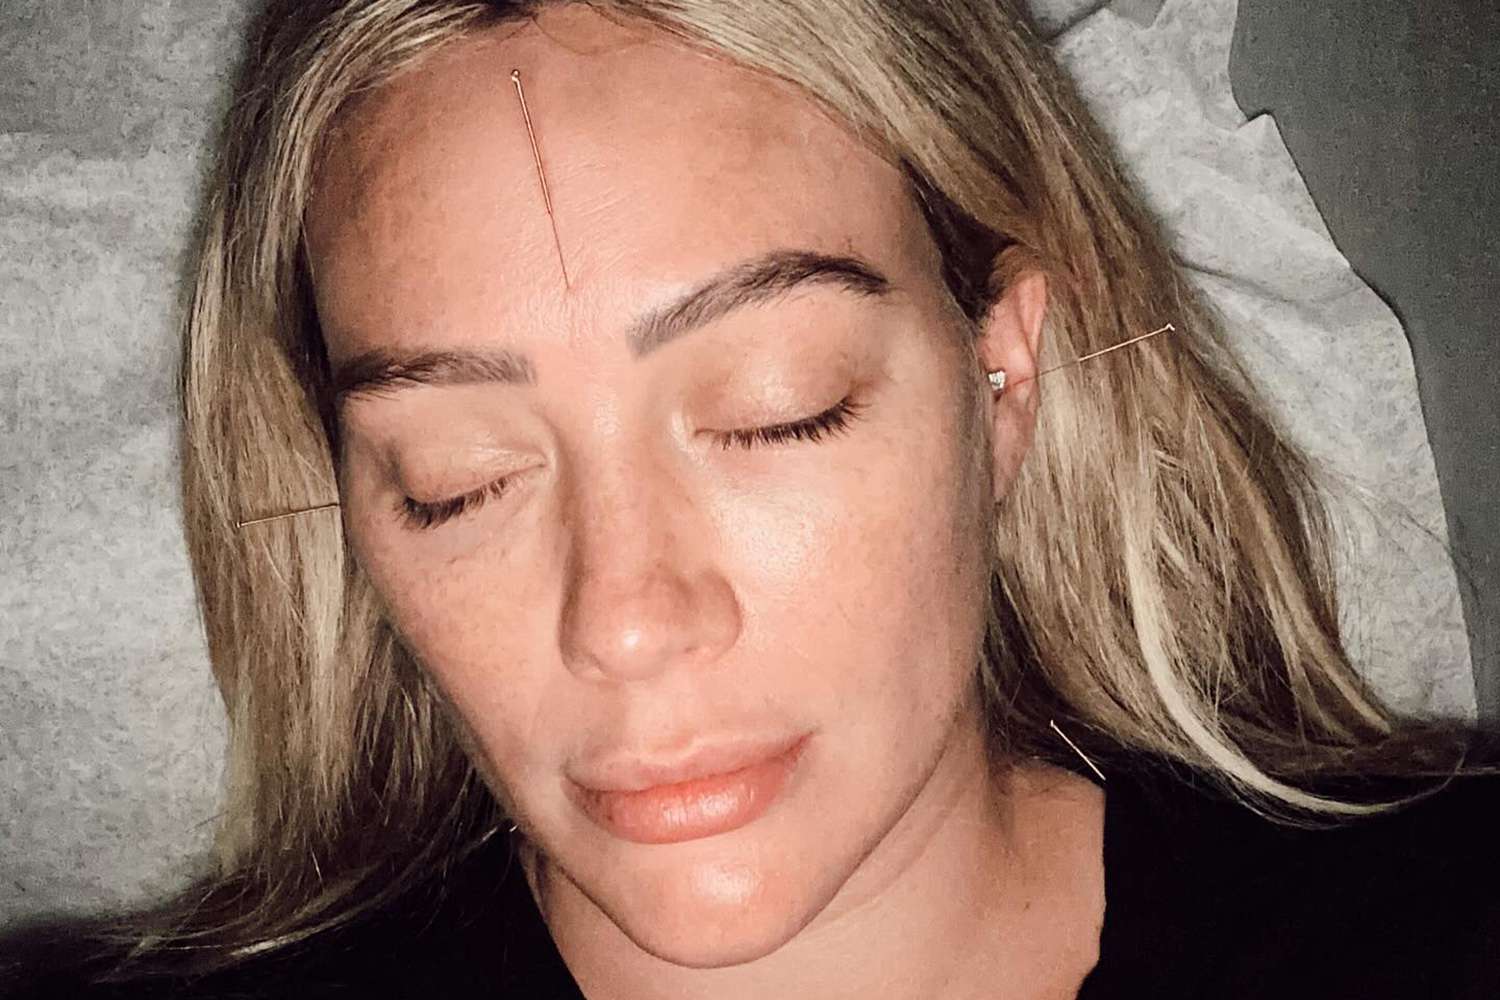 Pregnant Hilary Duff Gets Acupuncture, Jokes It’s Baby’s ‘Eviction Notice’ [Video]